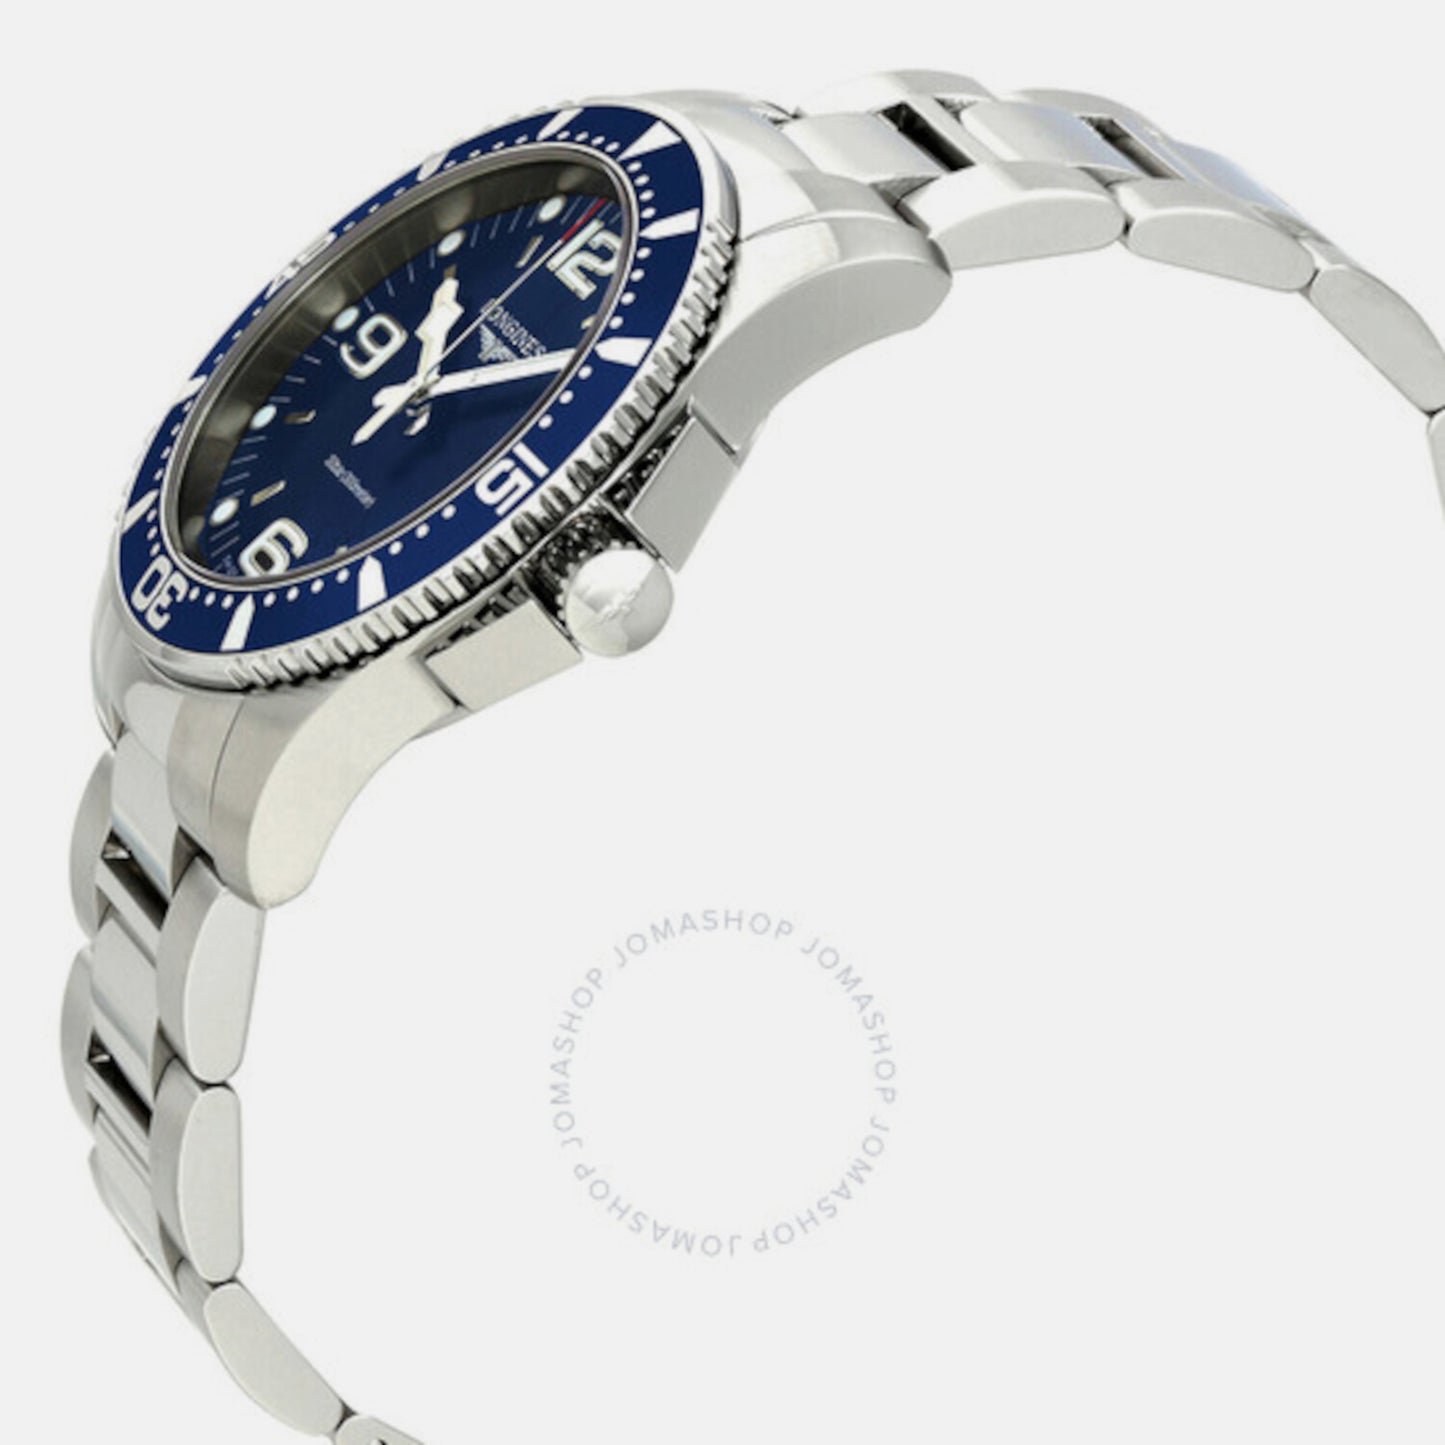 Male Blue Analog Stainless Steel Watch L37404966